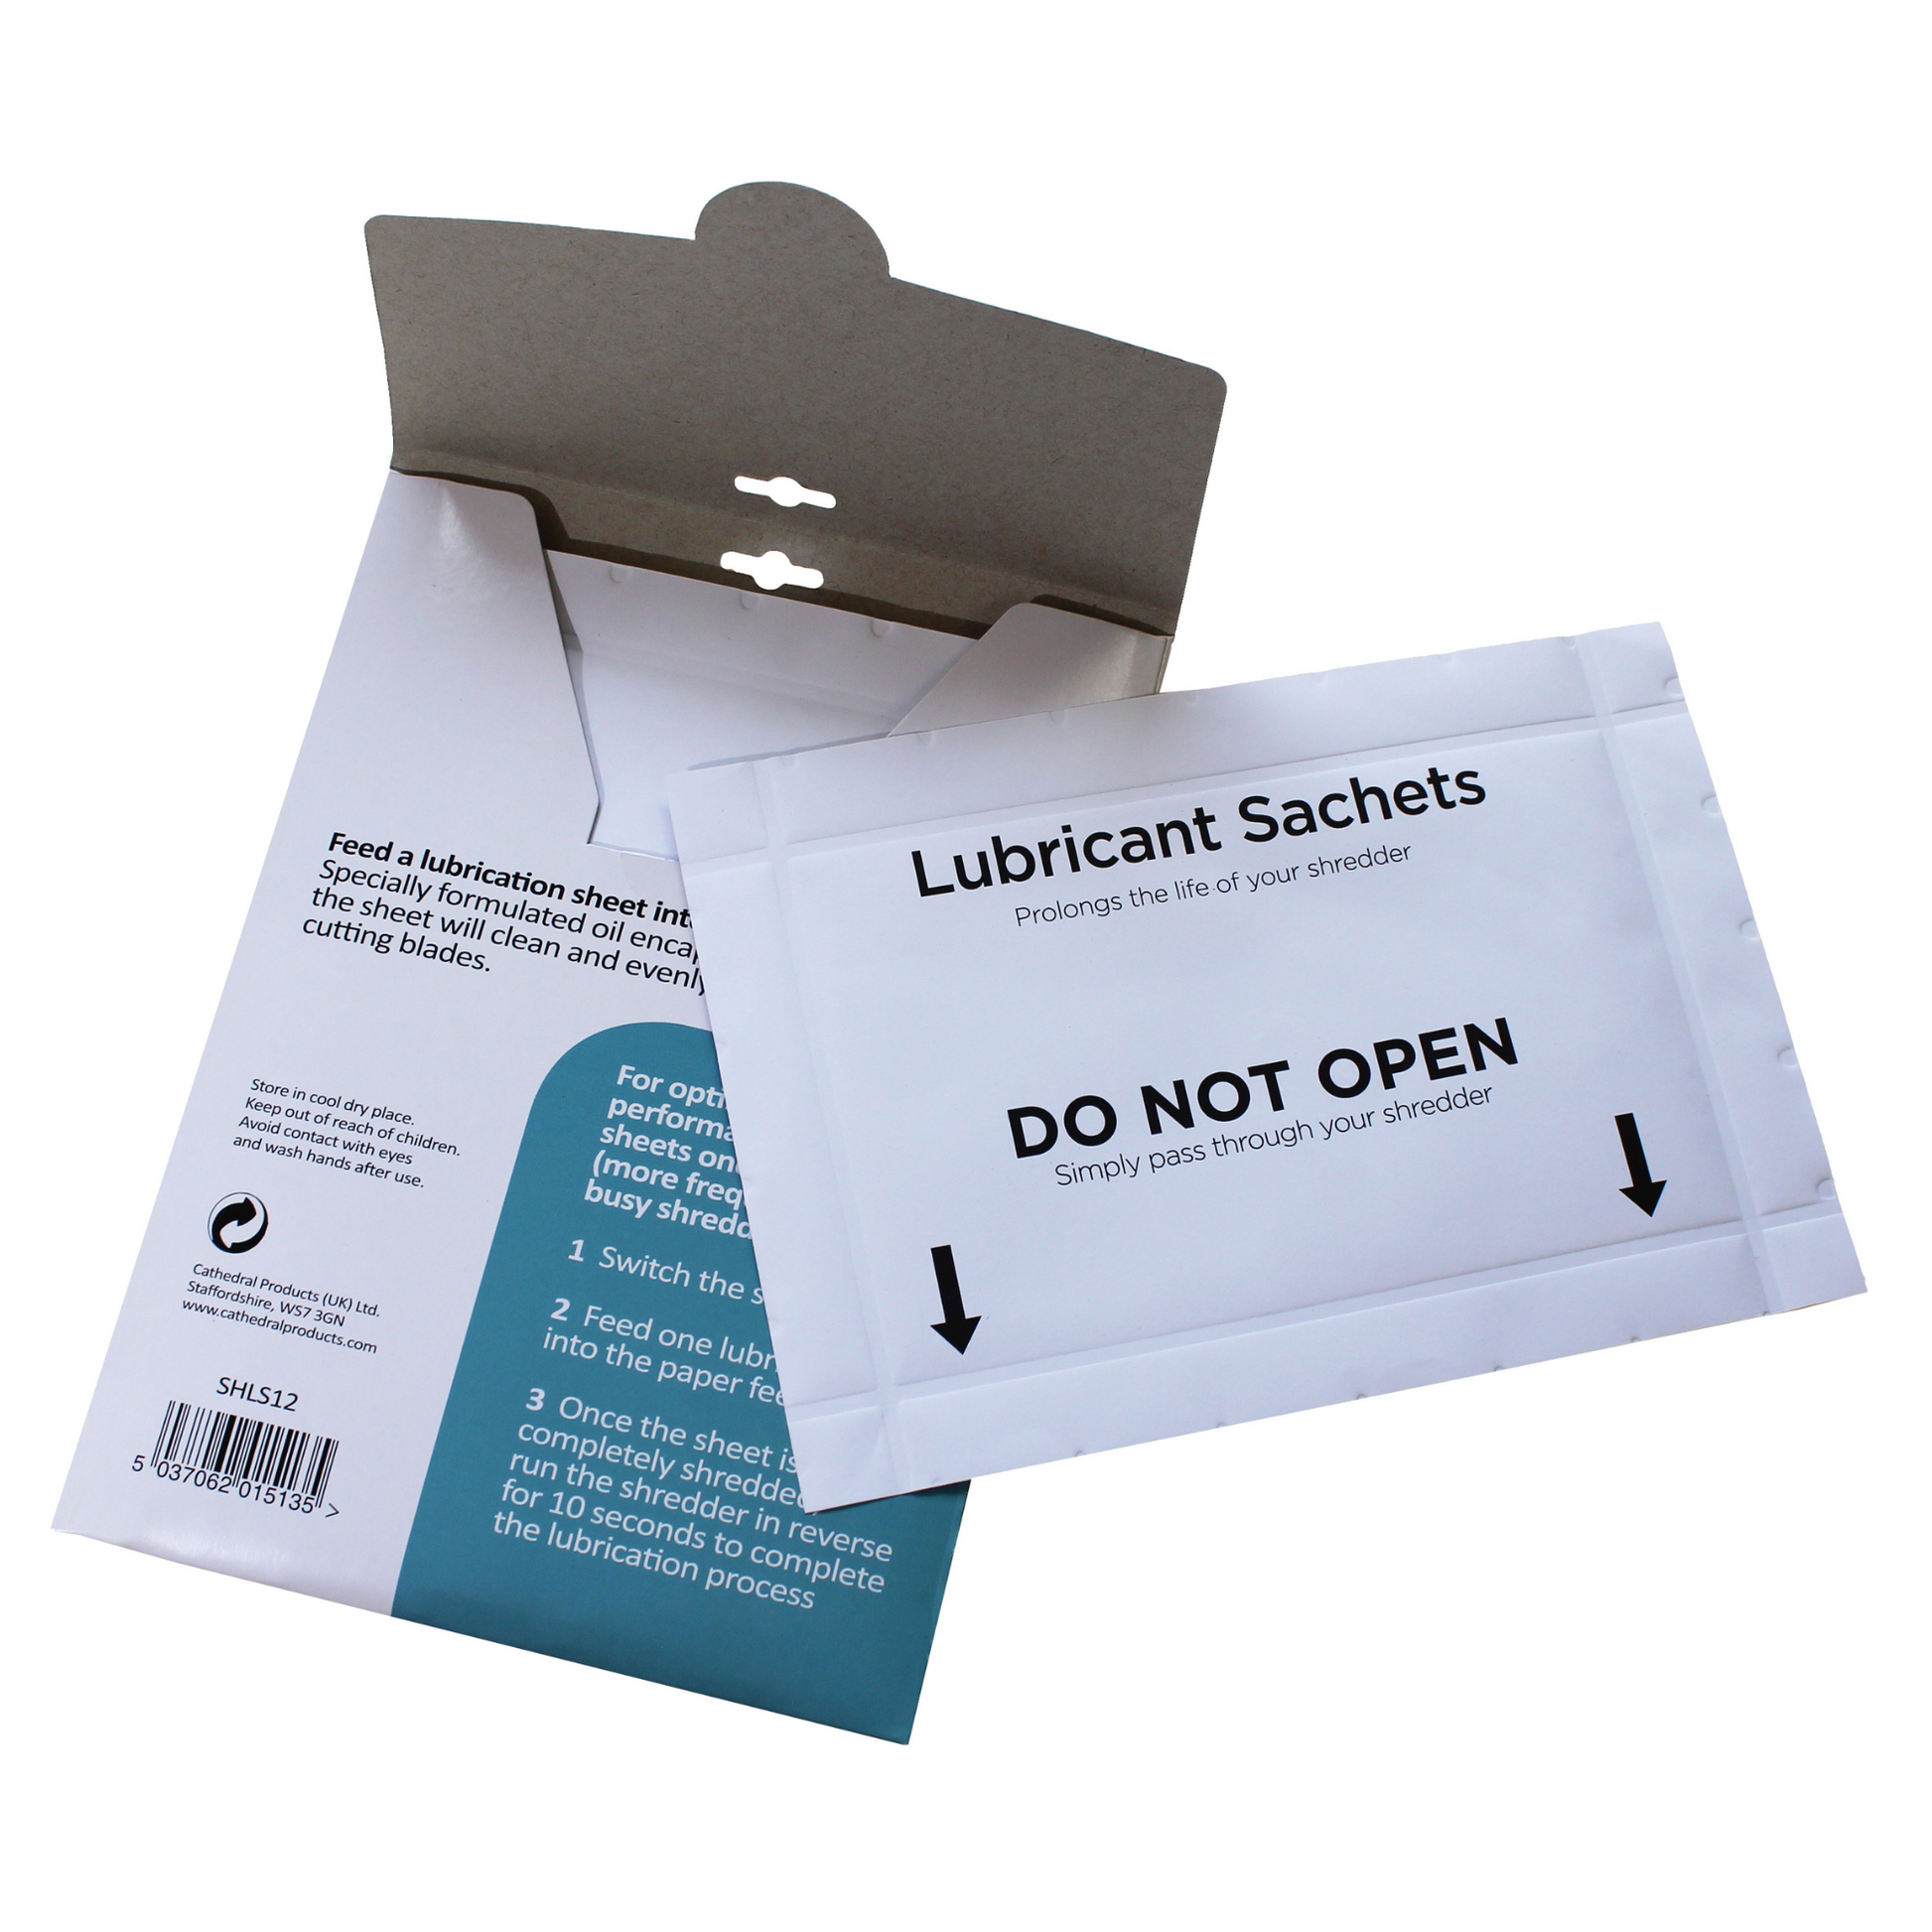 An open pack of 12 shredder lubrication sachets by Cathedral Products, with a sachet labelled 'Lubrication Sachets' on top of the open packet. Sachet is also printed with details on how to use to indicate the ease of use for maintaining and prolonging the life of shredder blades.